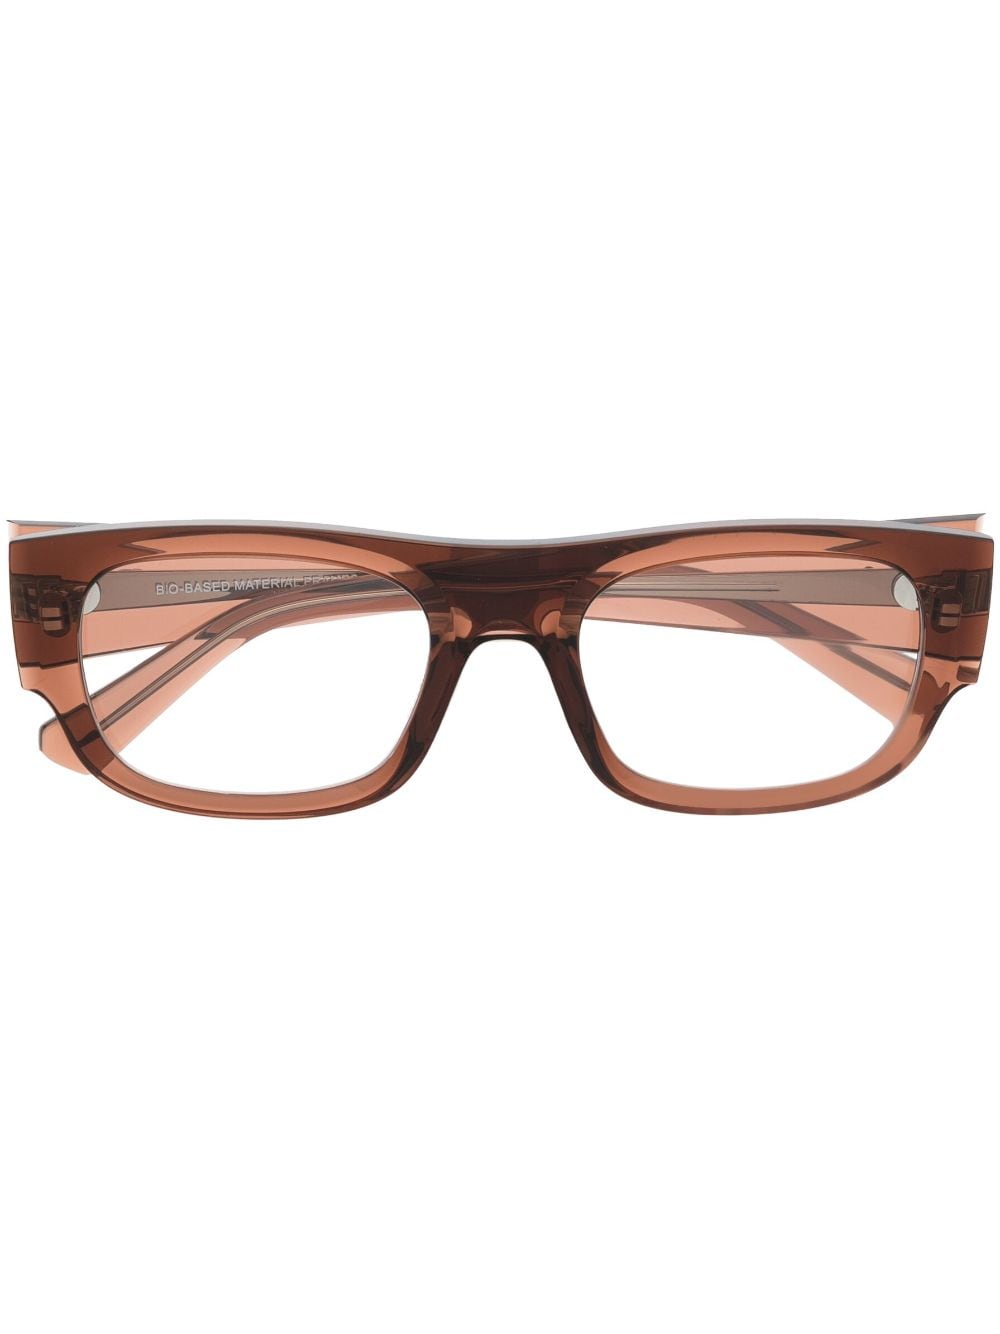 Ray-Ban rectangle-frame clear-lenses glasses - Brown von Ray-Ban